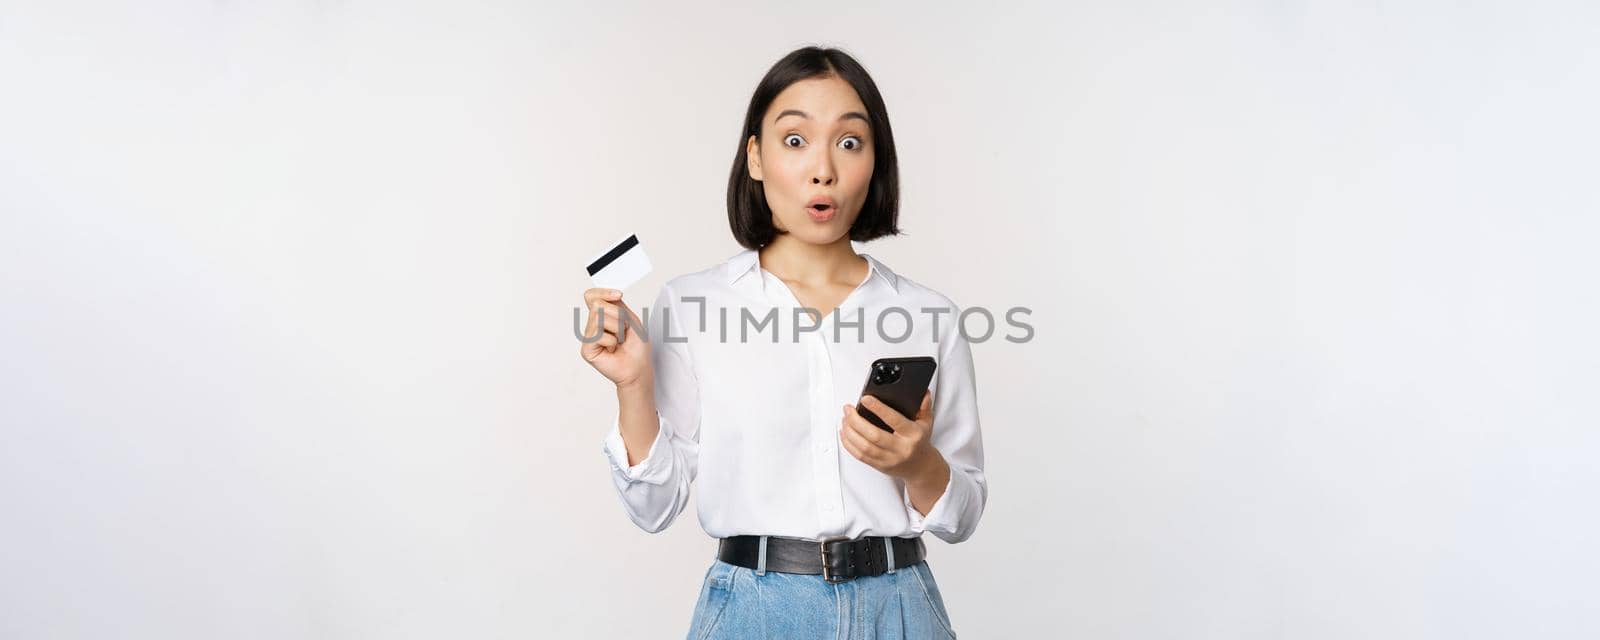 Online shopping concept. Image of surprised asian girl, holding credit card and smartphone, looking amazed in disbelief at camera, white background.